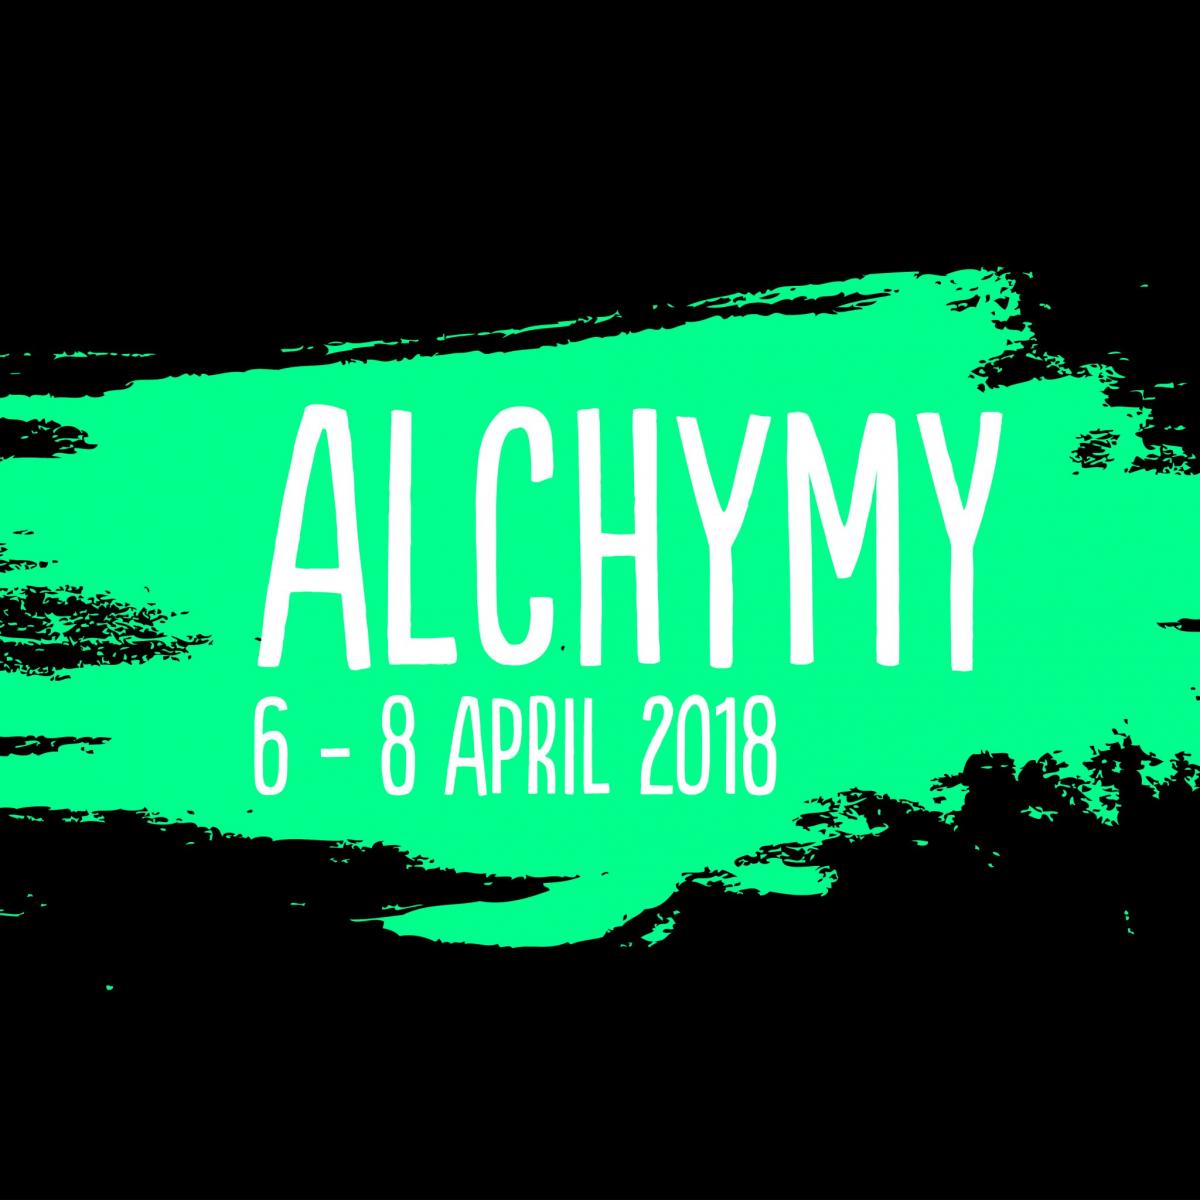 Check out The North Wall's line-up for Alchymy 2018!